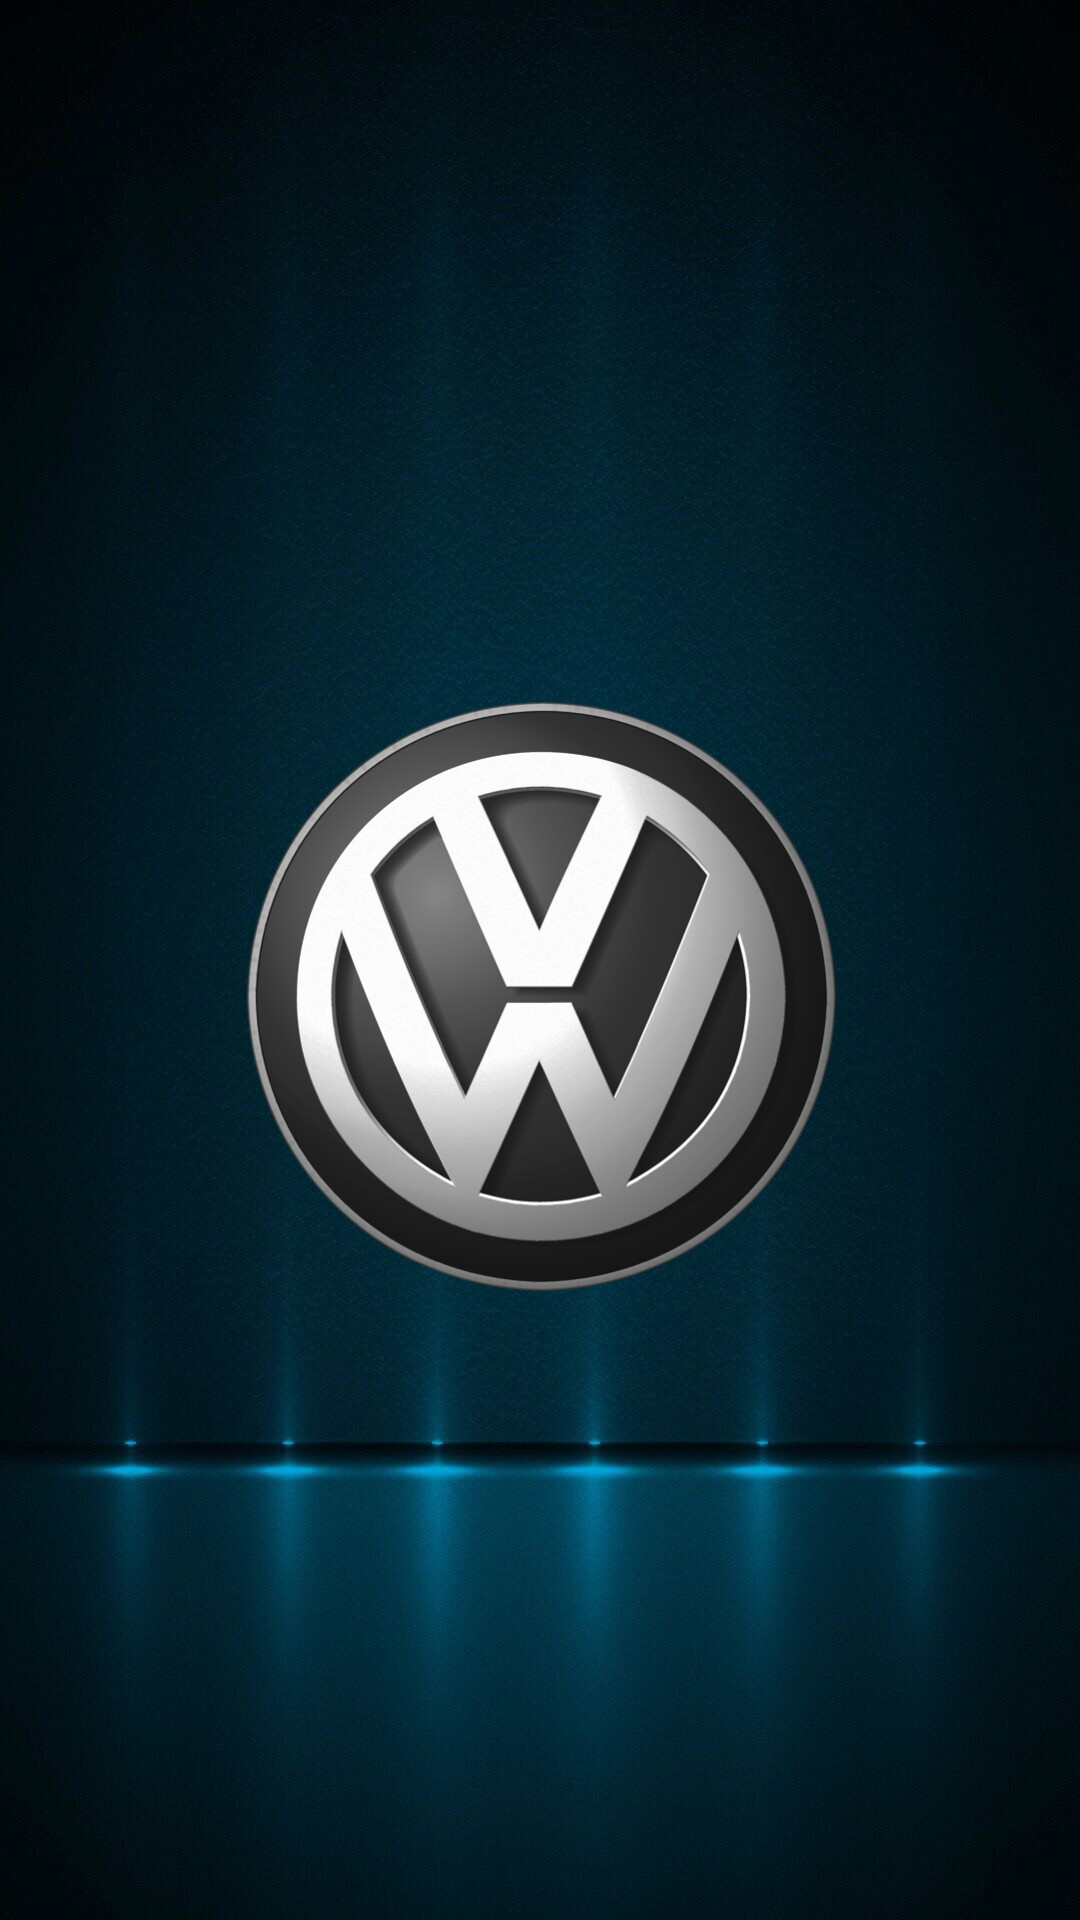 Volkswagen: The company is recognized as one of the leading car manufacturers, Logo. 1080x1920 Full HD Background.